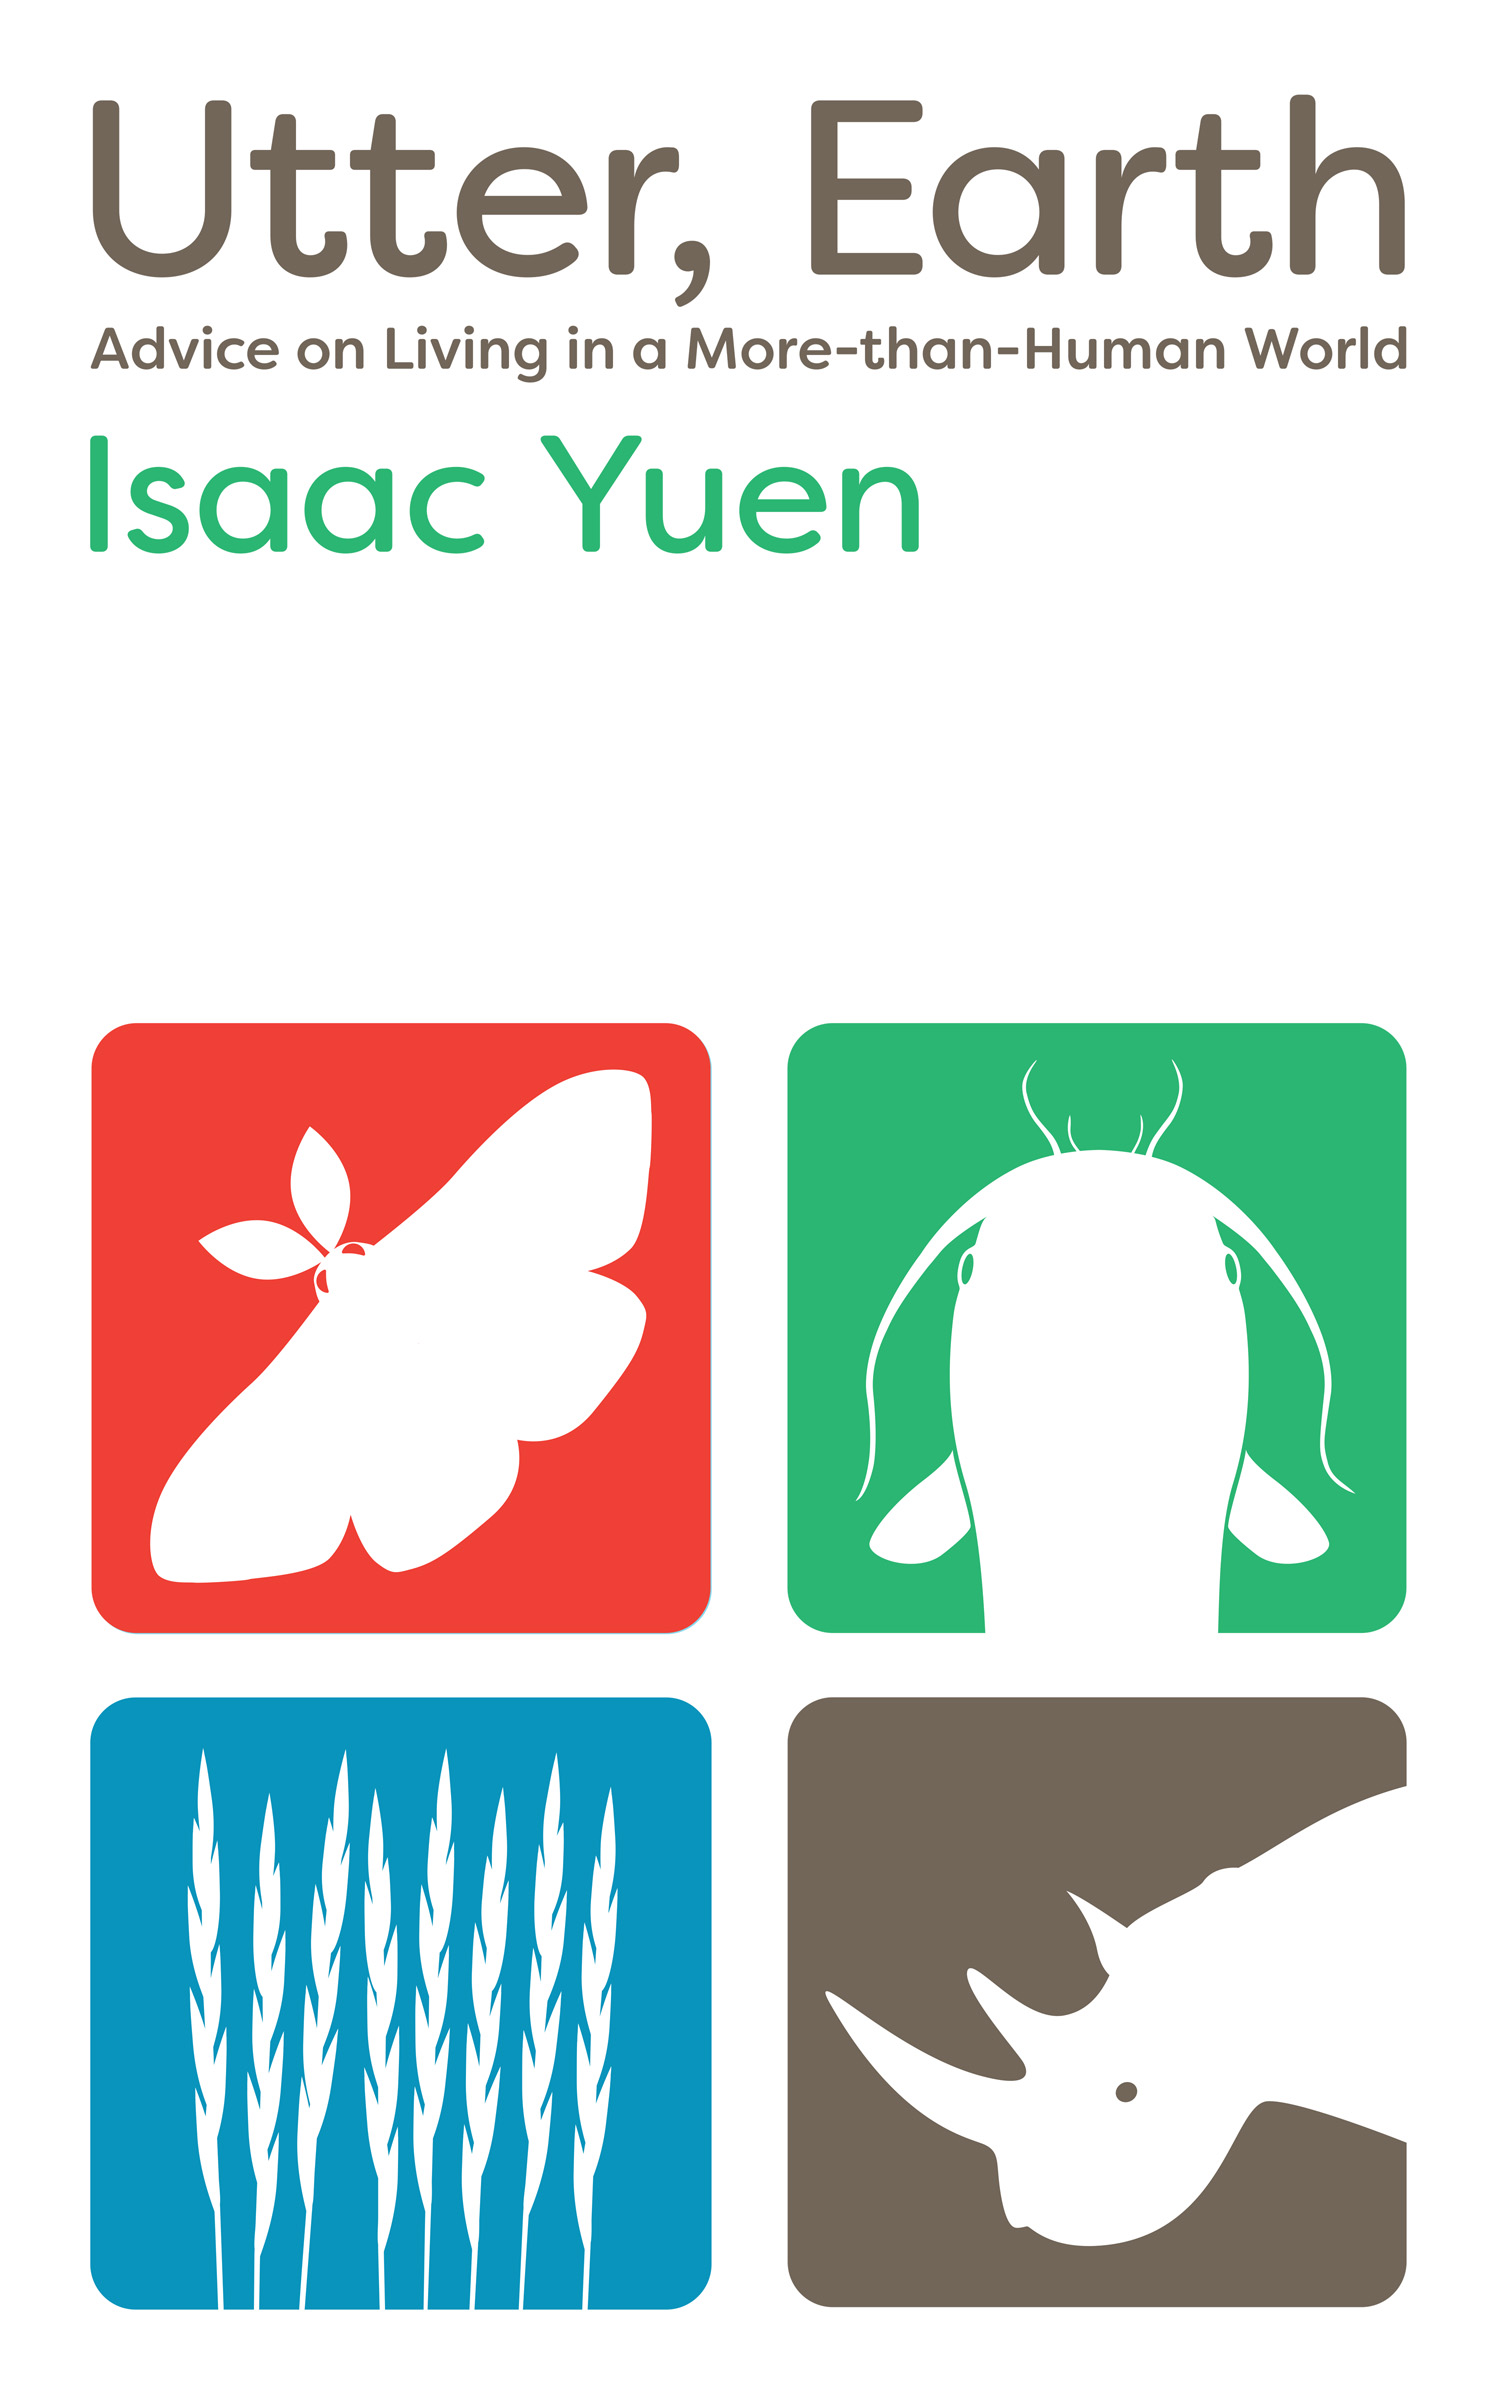 Text at top reads Utter, Earth: Advice on Living in a More-than-Human World, Isaac Yuen. Beneath the text are four illustrations: a moth silhouette, in white, against a red background, a catfish silhouette, in white, against a mint green background, a silhouette of wheat, in white, against a blue background, and a rhino silhouette, in white against a mushroom background